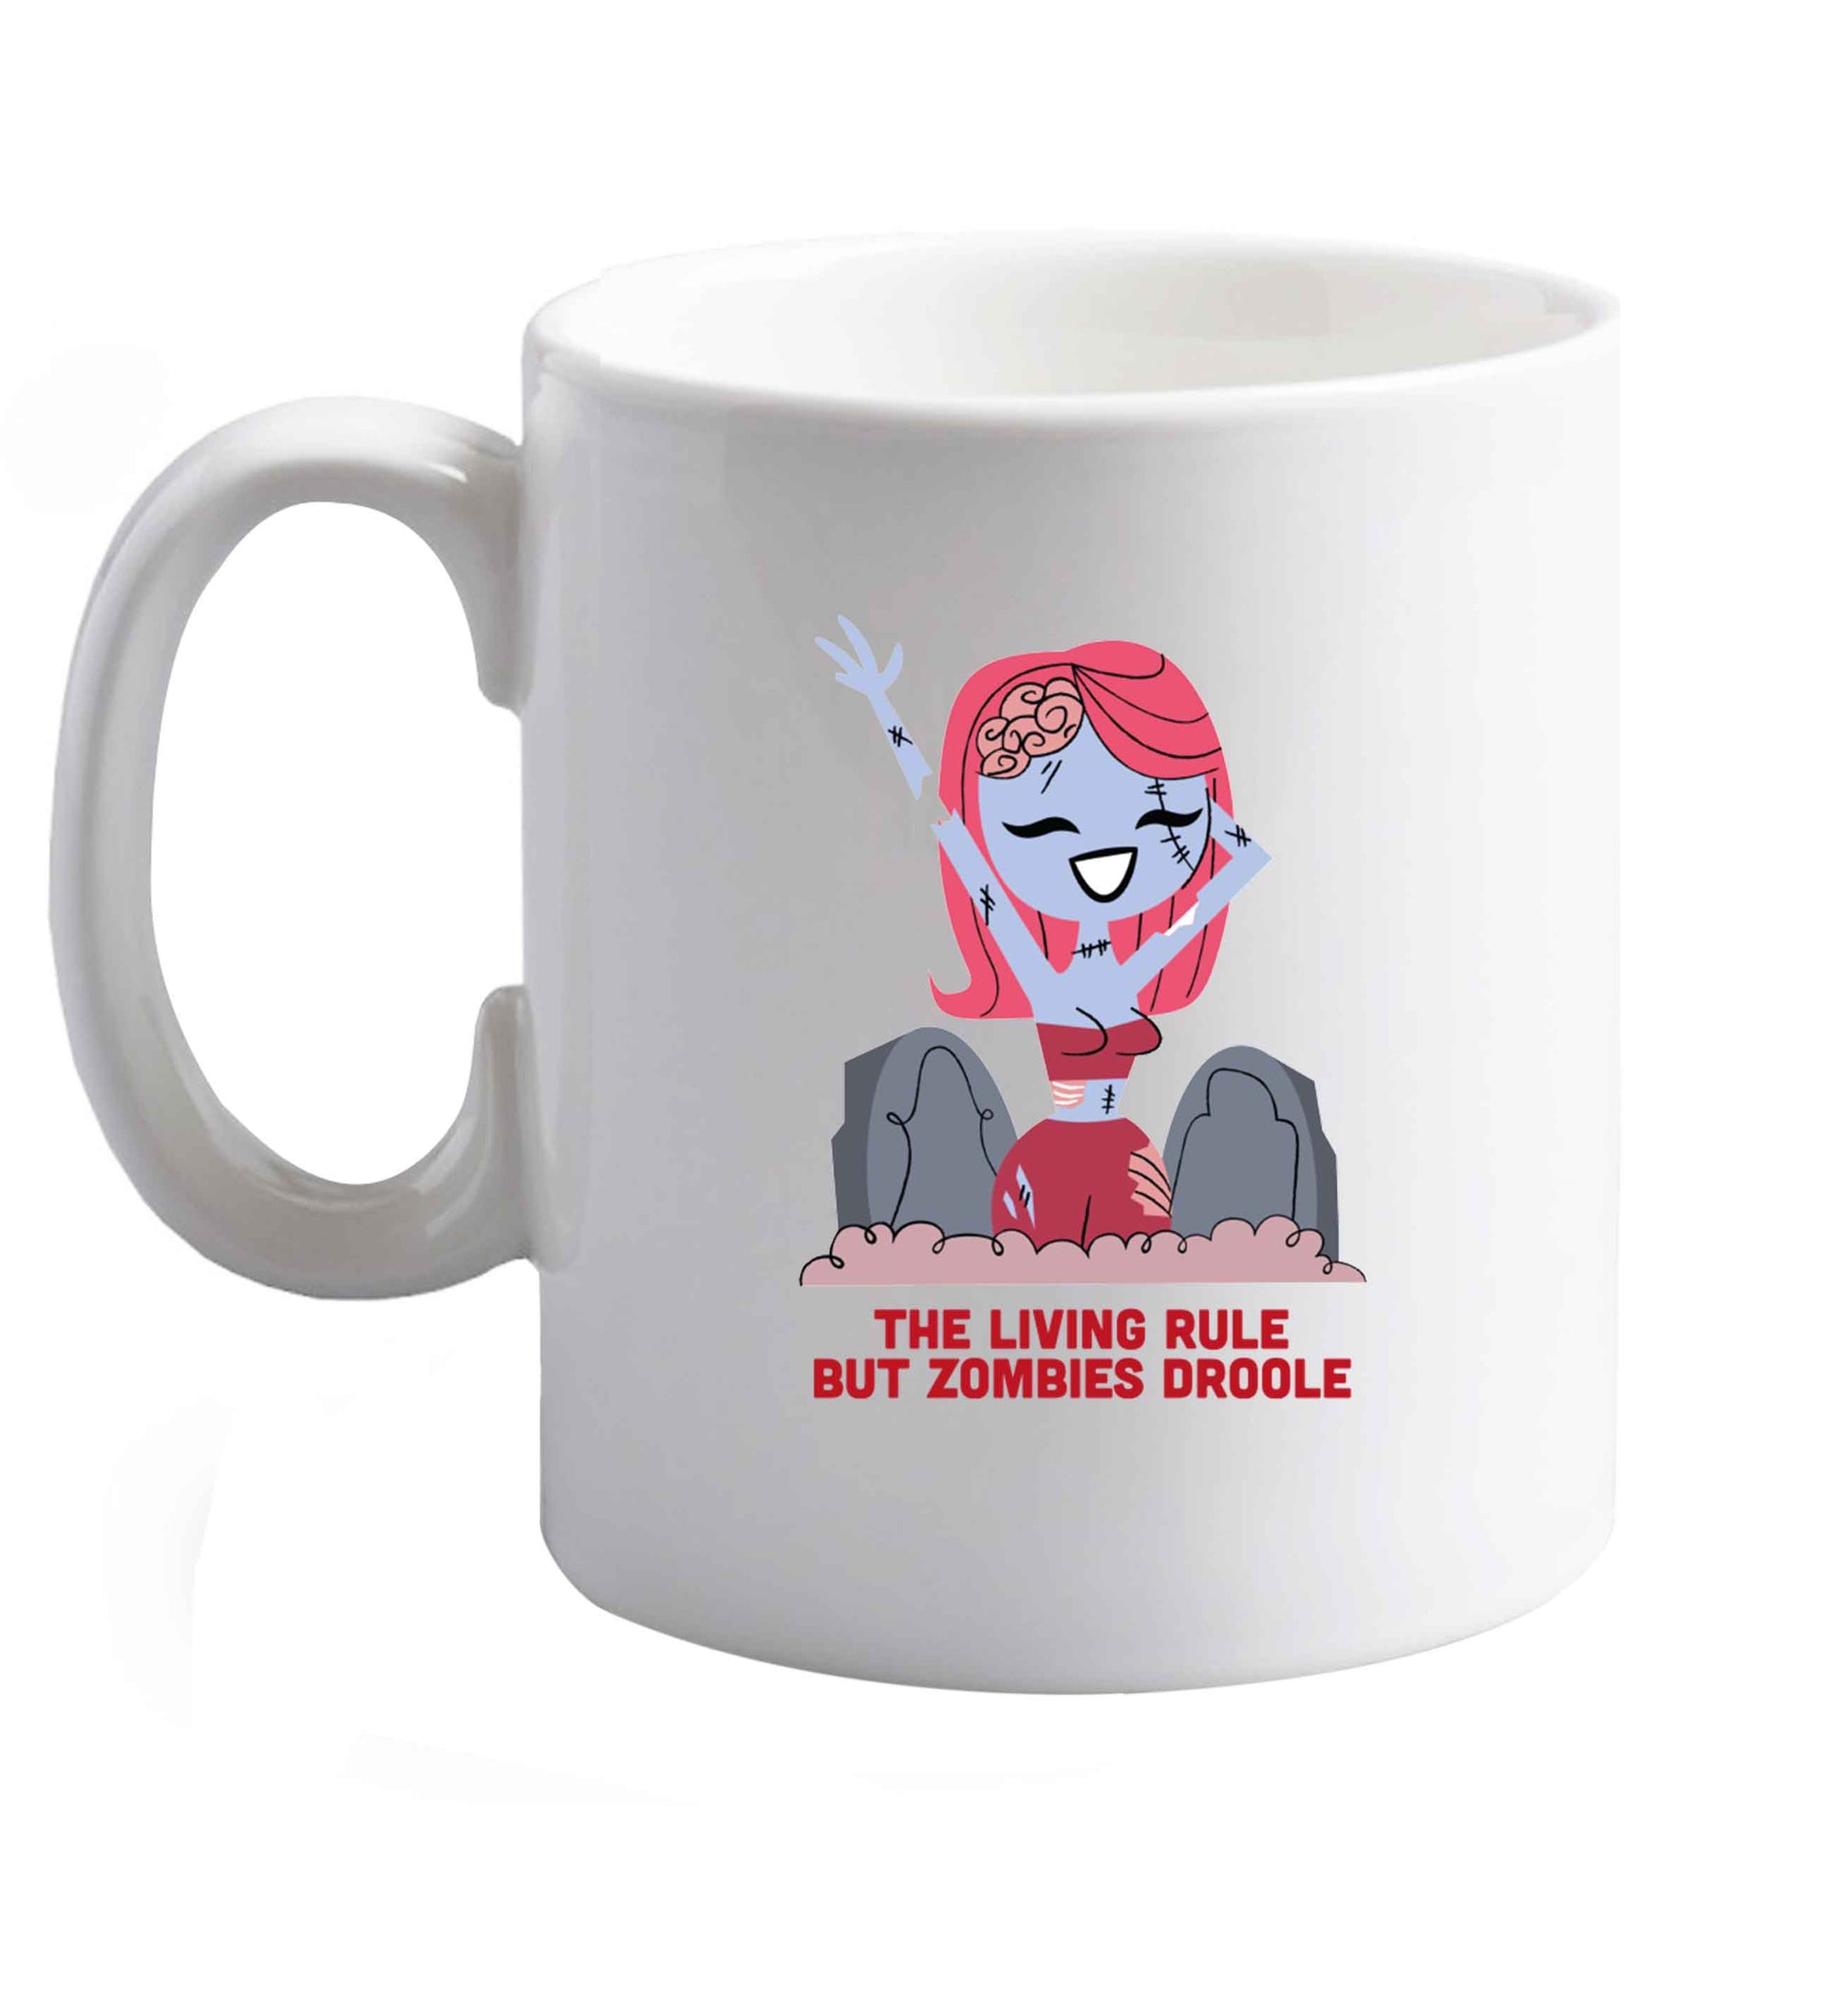 10 oz Living rule but zombies droole ceramic mug right handed